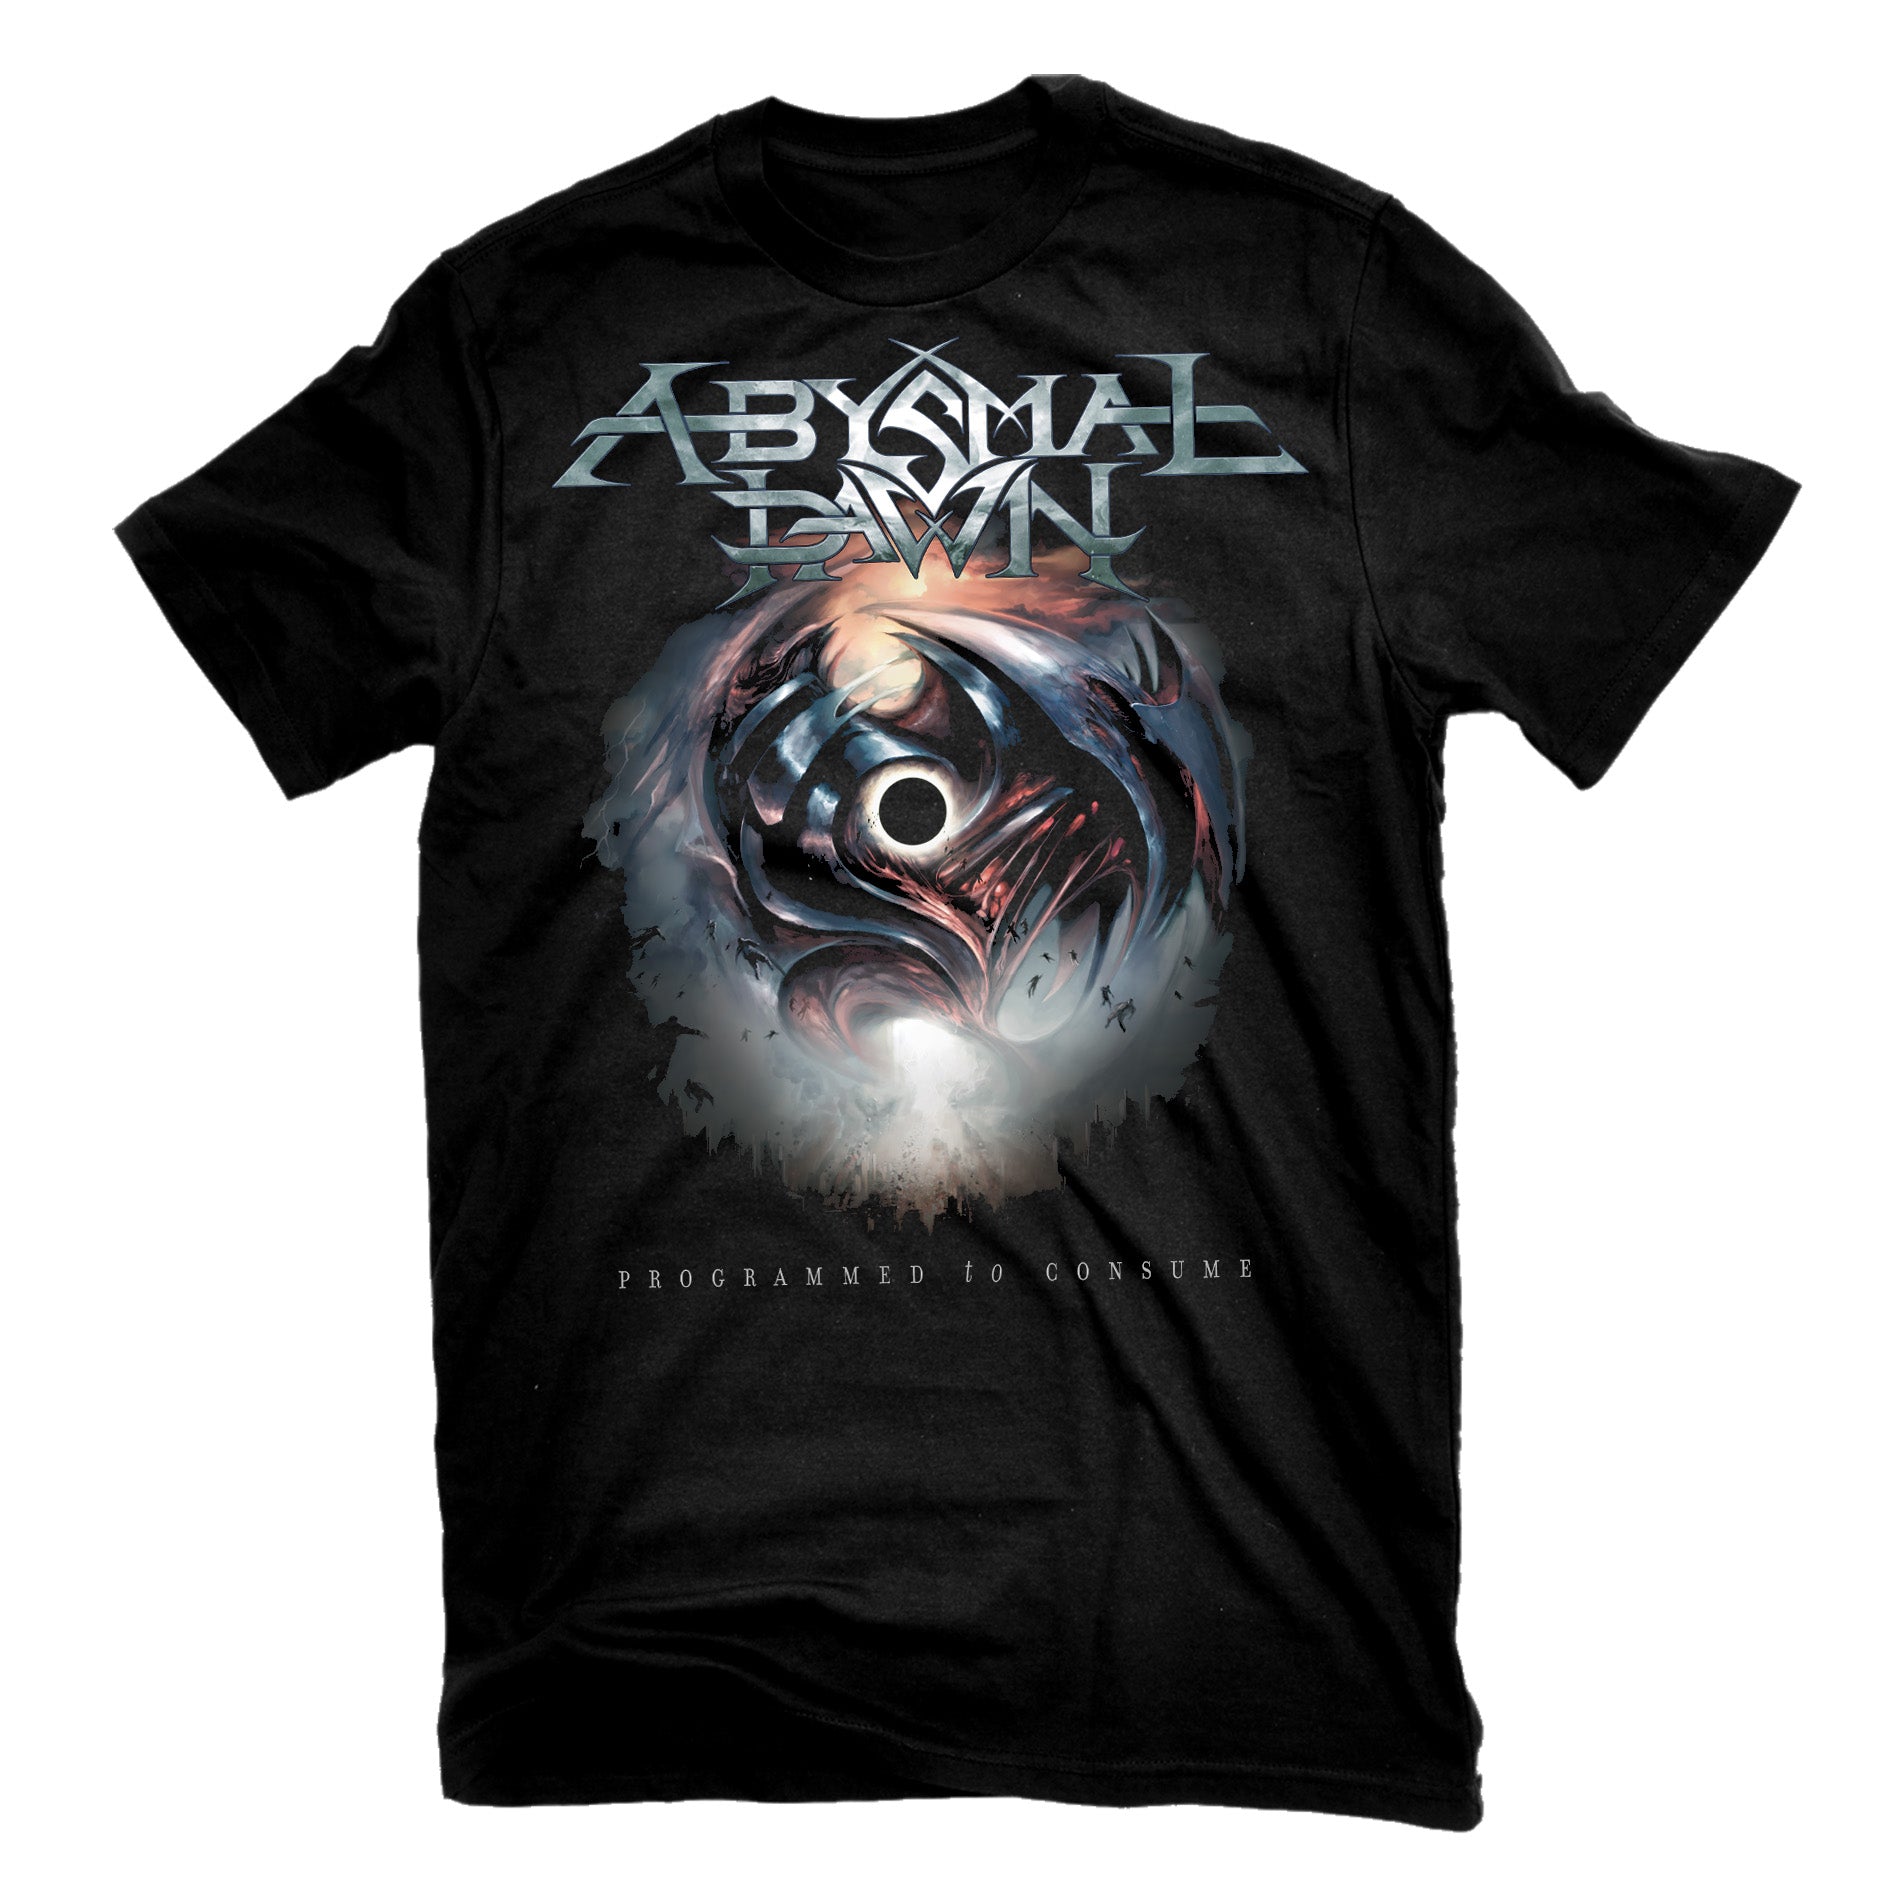 Abysmal Dawn "Programmed to Consume" T-Shirt